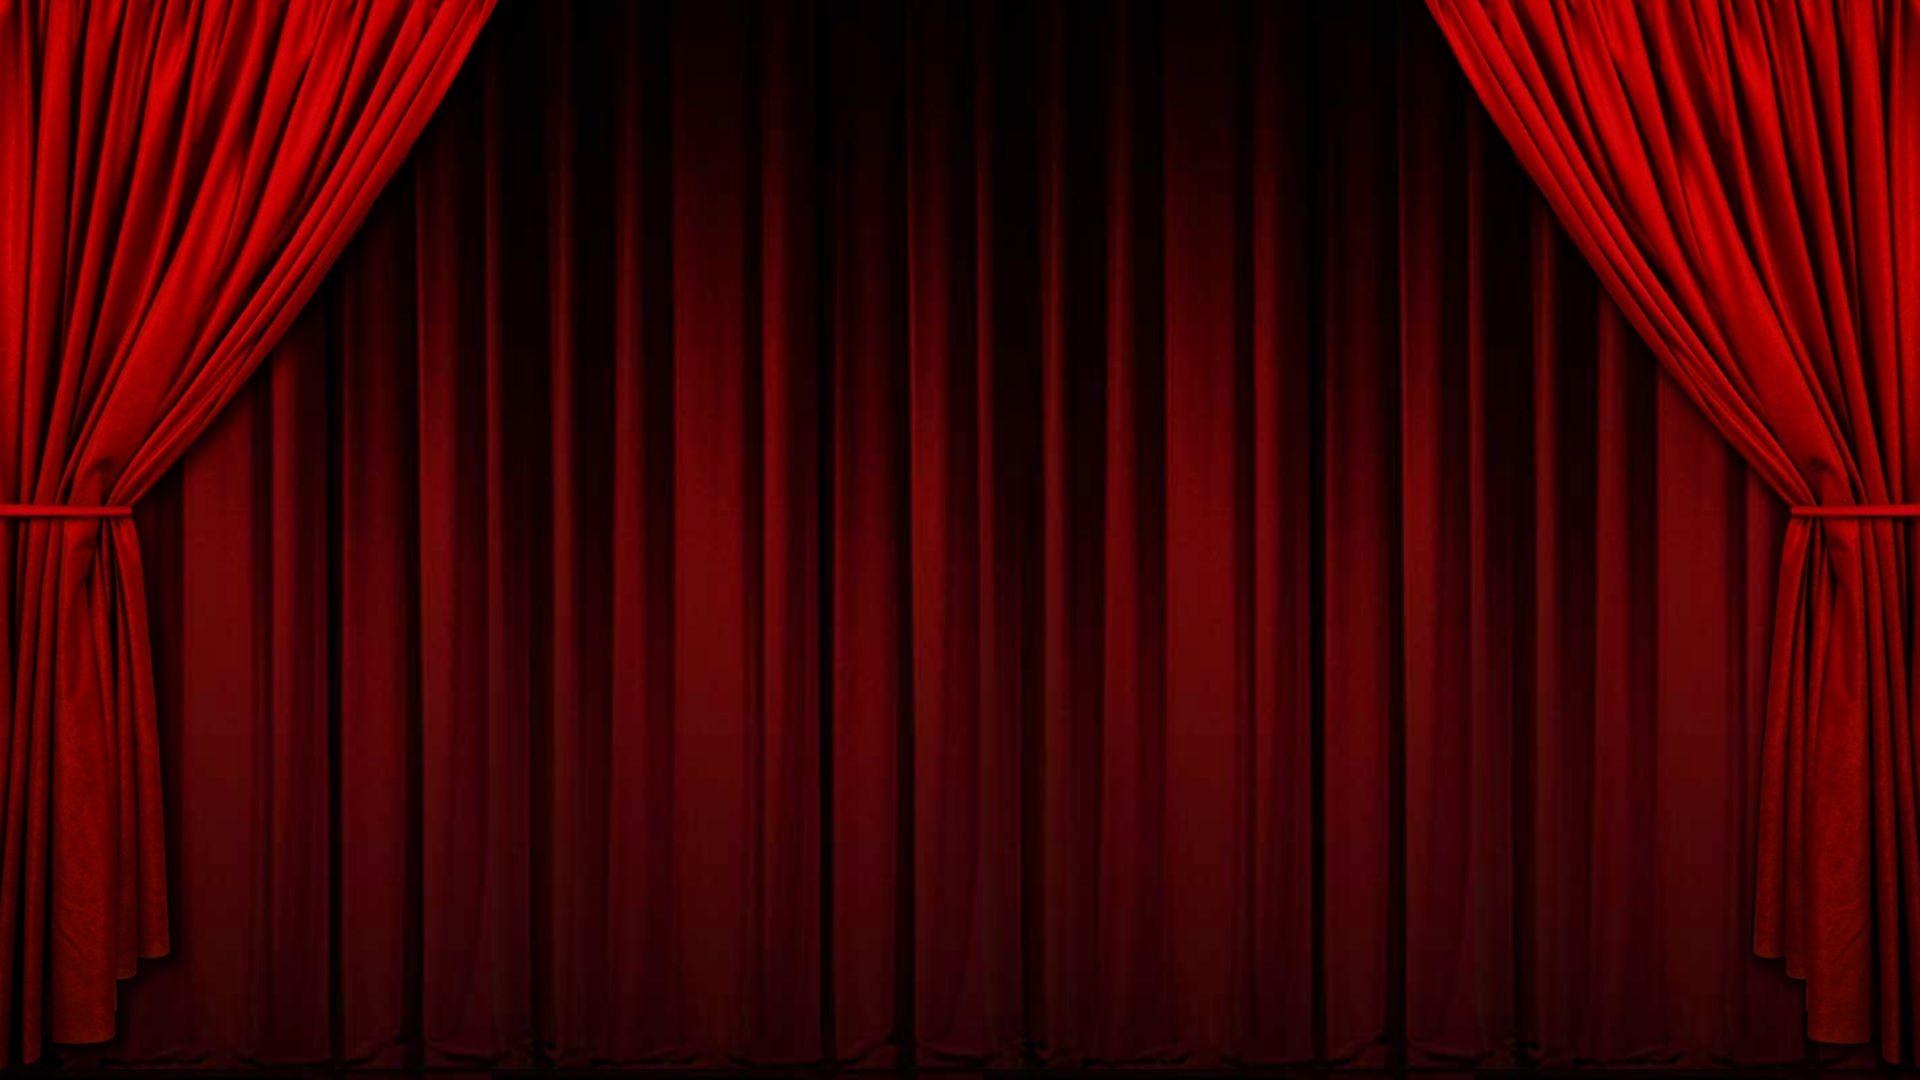 Curtains Background clipart to Base64